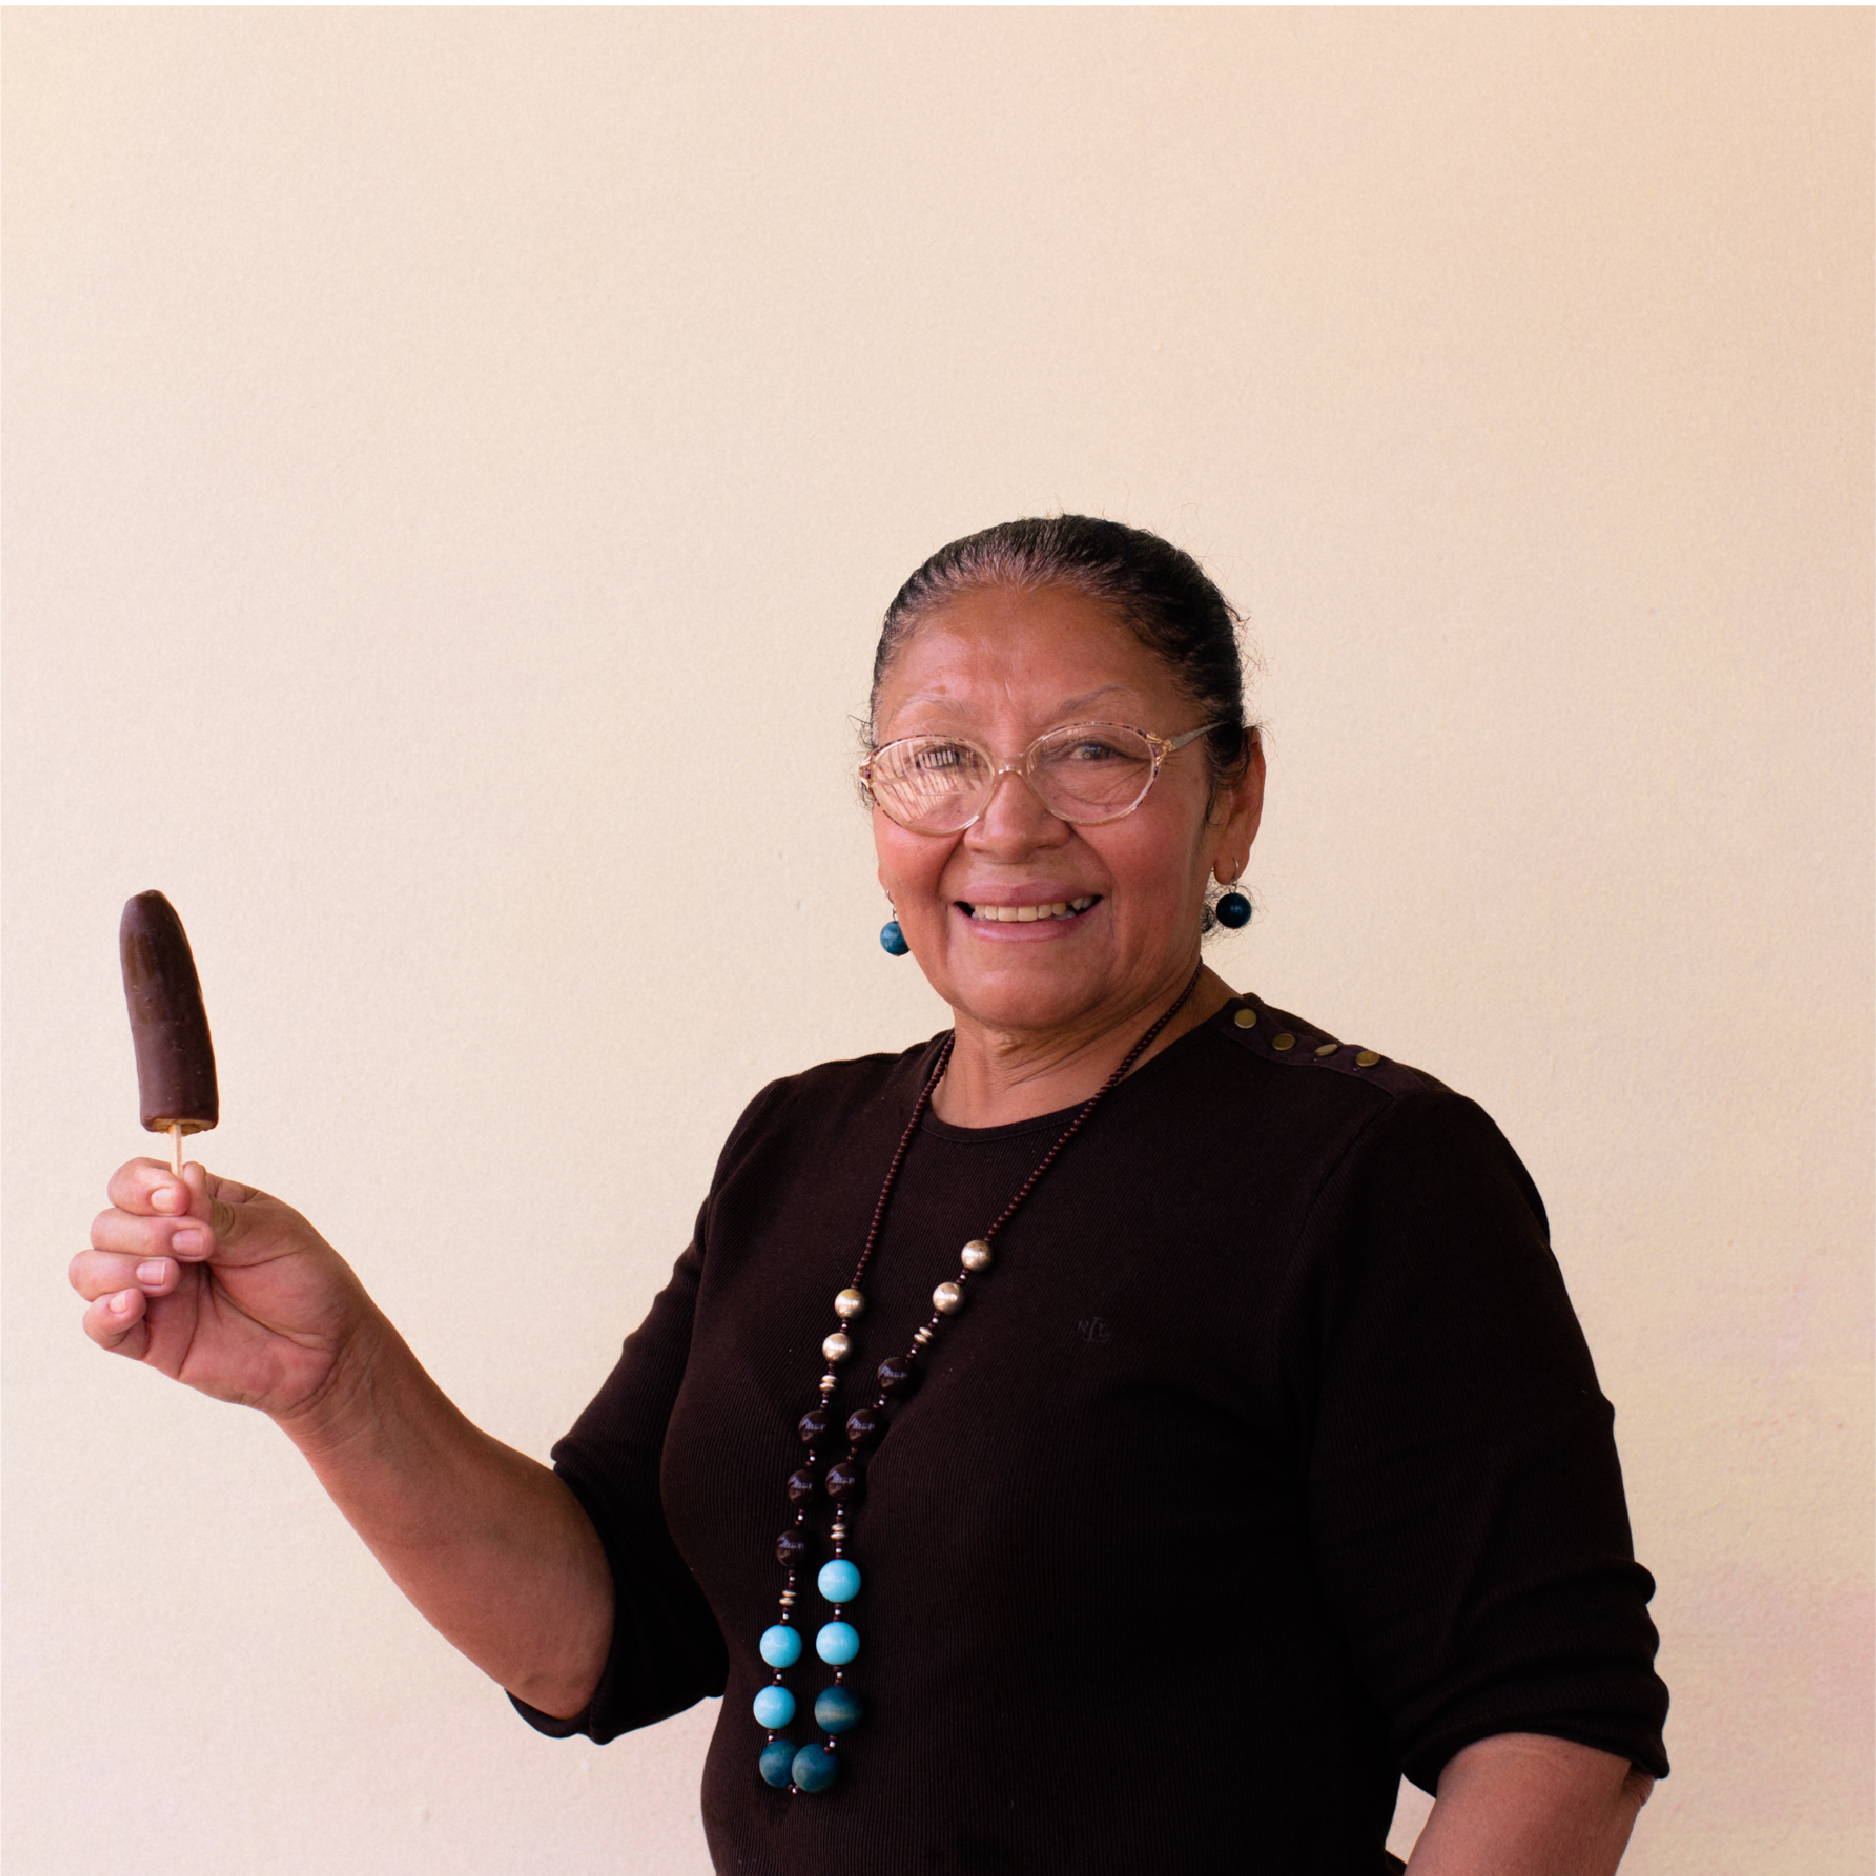 A Honduran woman stands and smiles while holding up her homemade chocolate covered banana on a stick.